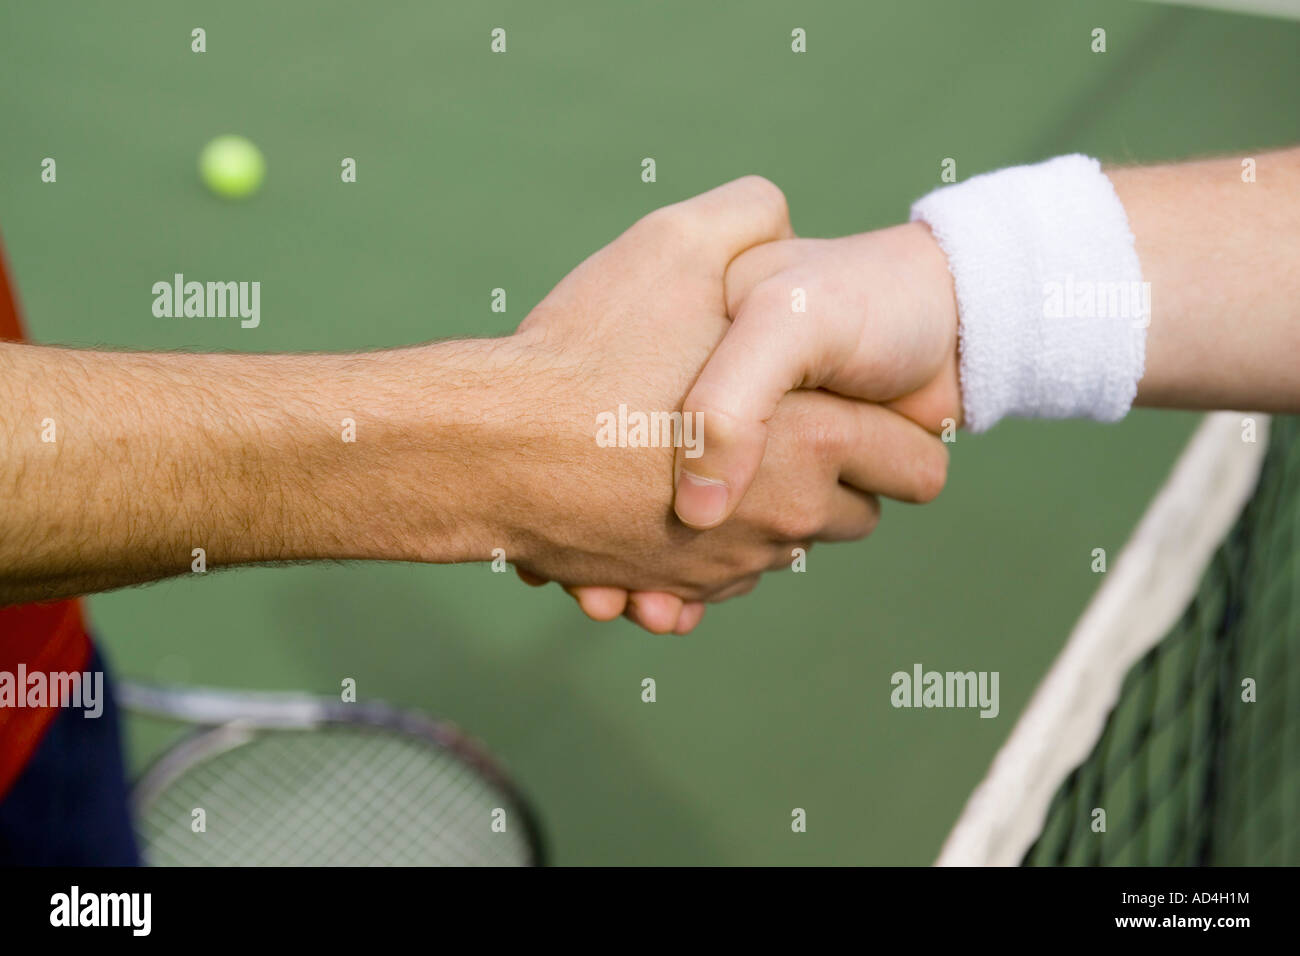 Two tennis players shaking hands Stock Photo